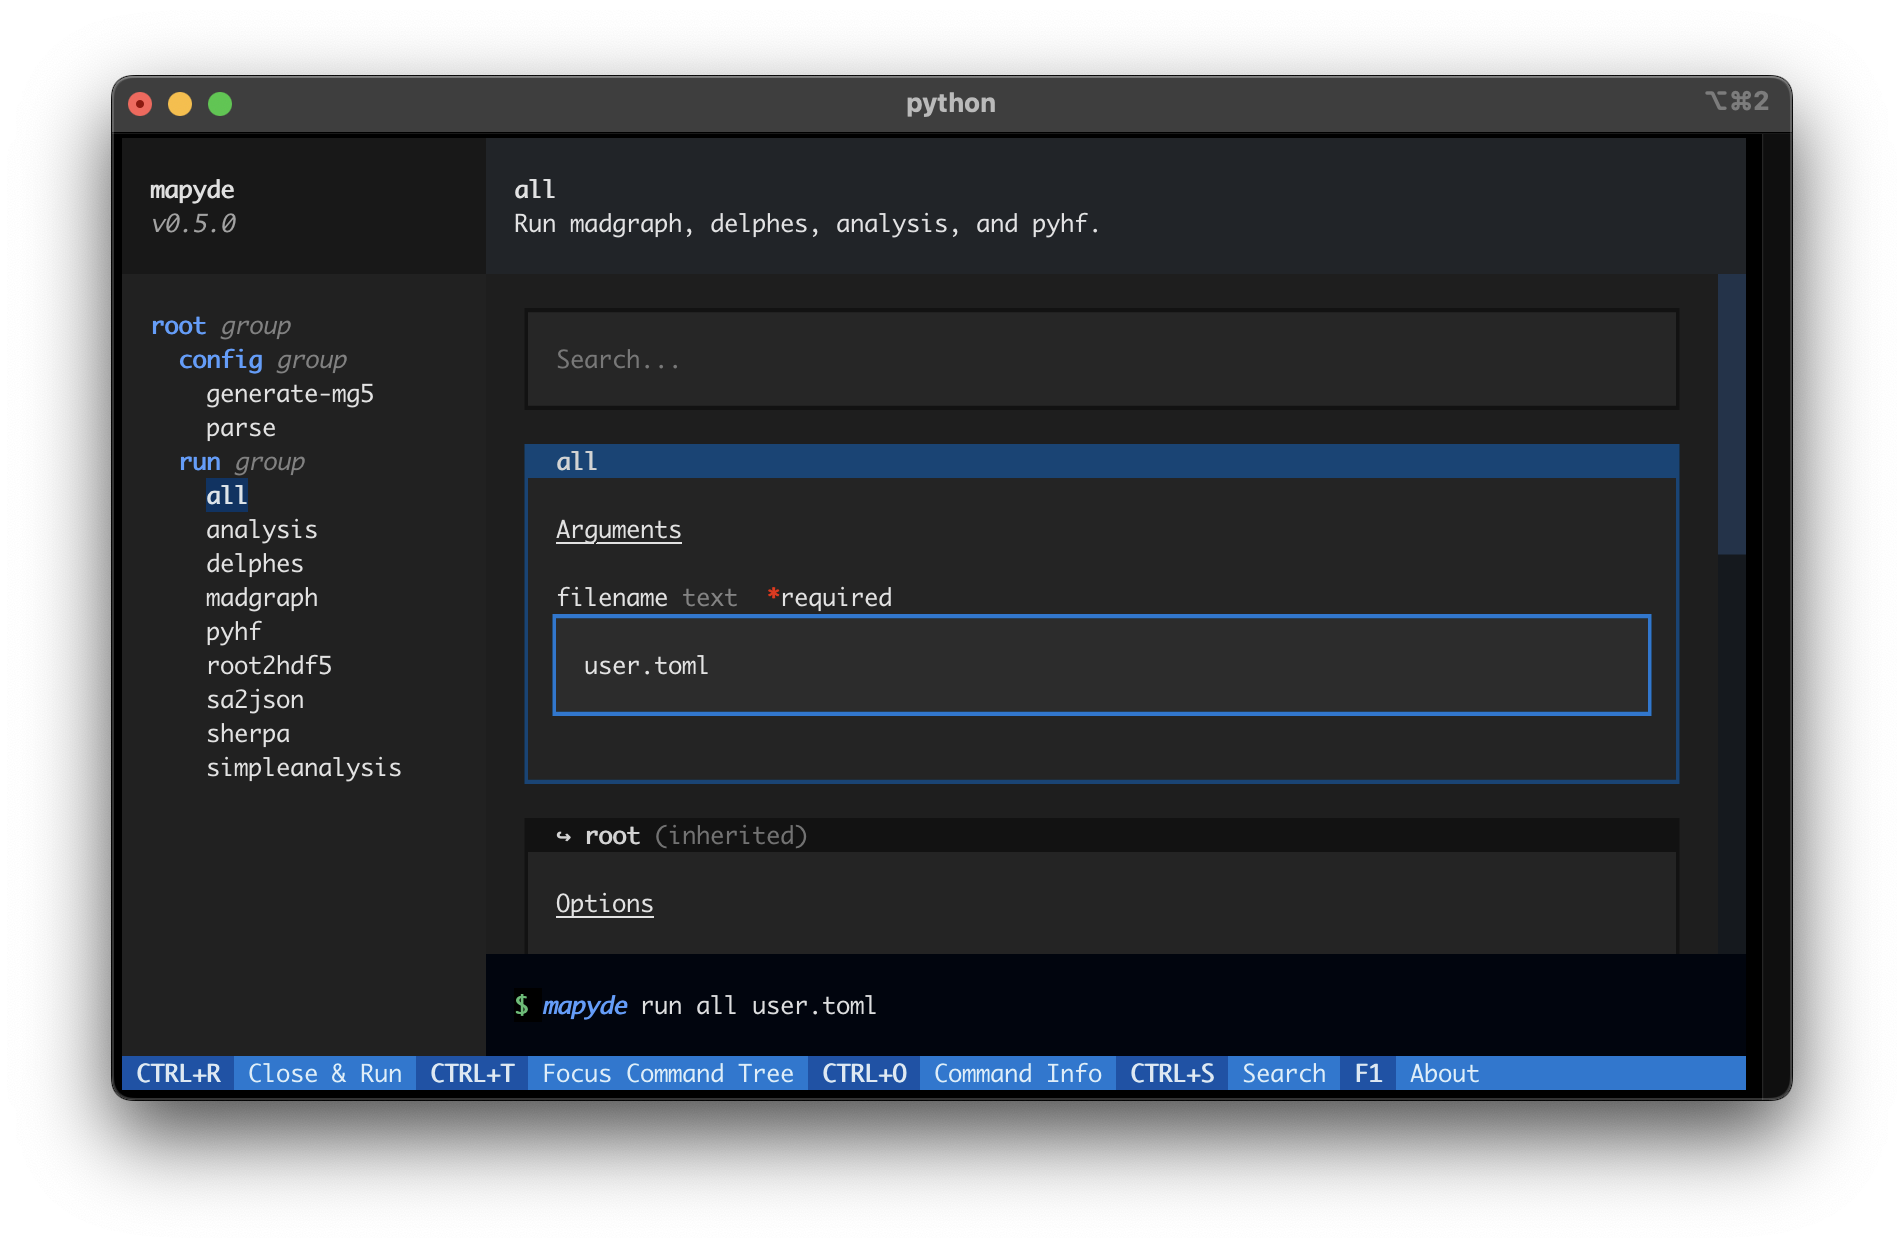 Screenshot of an iTerm2 terminal showing the Textual User Interface option of 